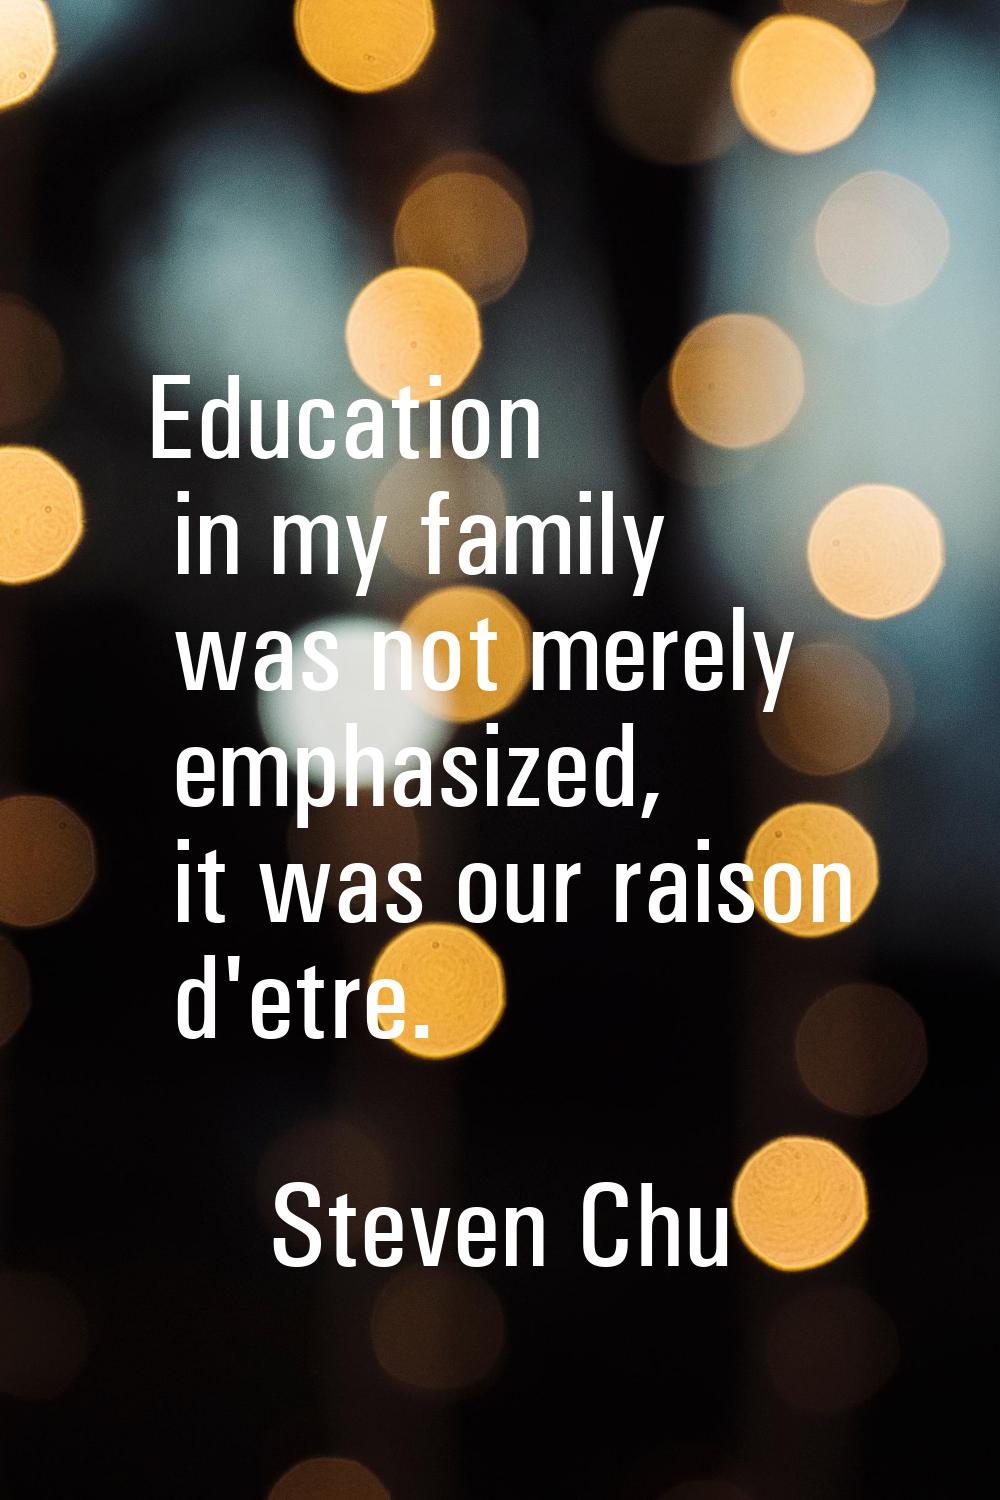 Education in my family was not merely emphasized, it was our raison d'etre.